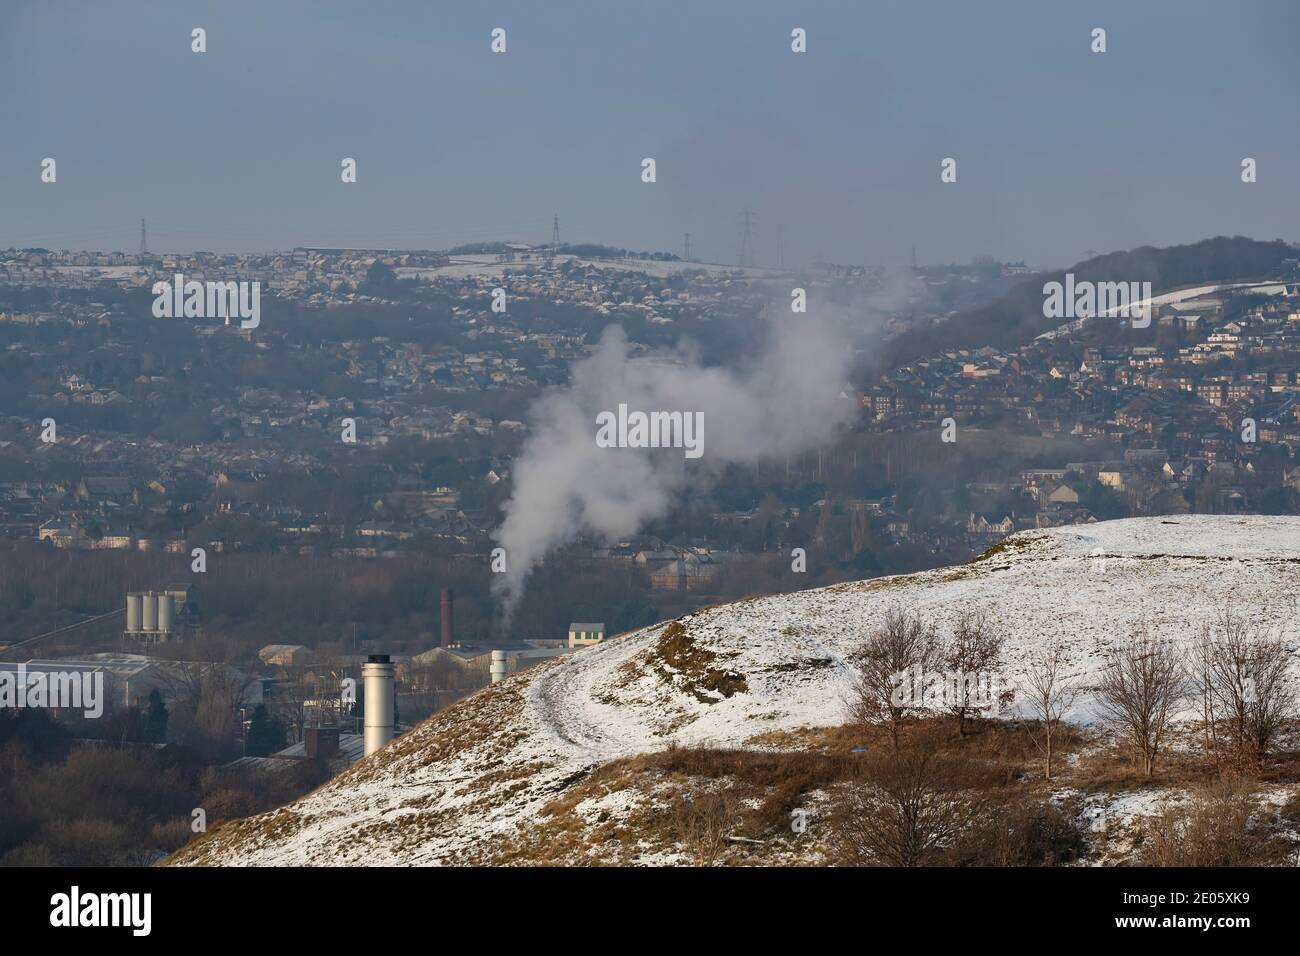 Smoke rising in the still winter's air from an industrial plant in Huddersfield as winter snow covers the gloomy landscape Stock Photo